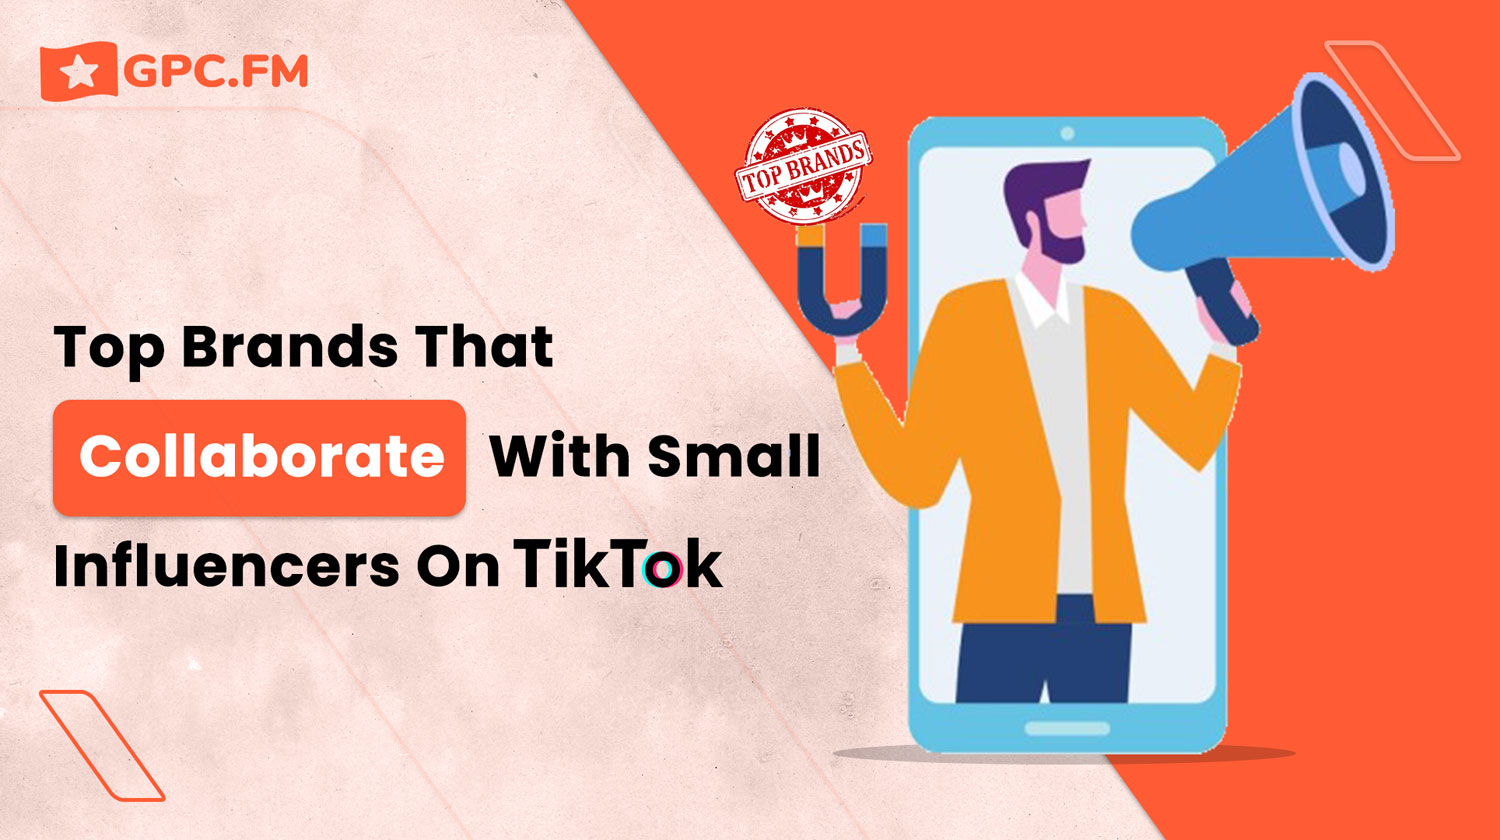 Top Brands That Collaborate With Small Influencers on TikTok